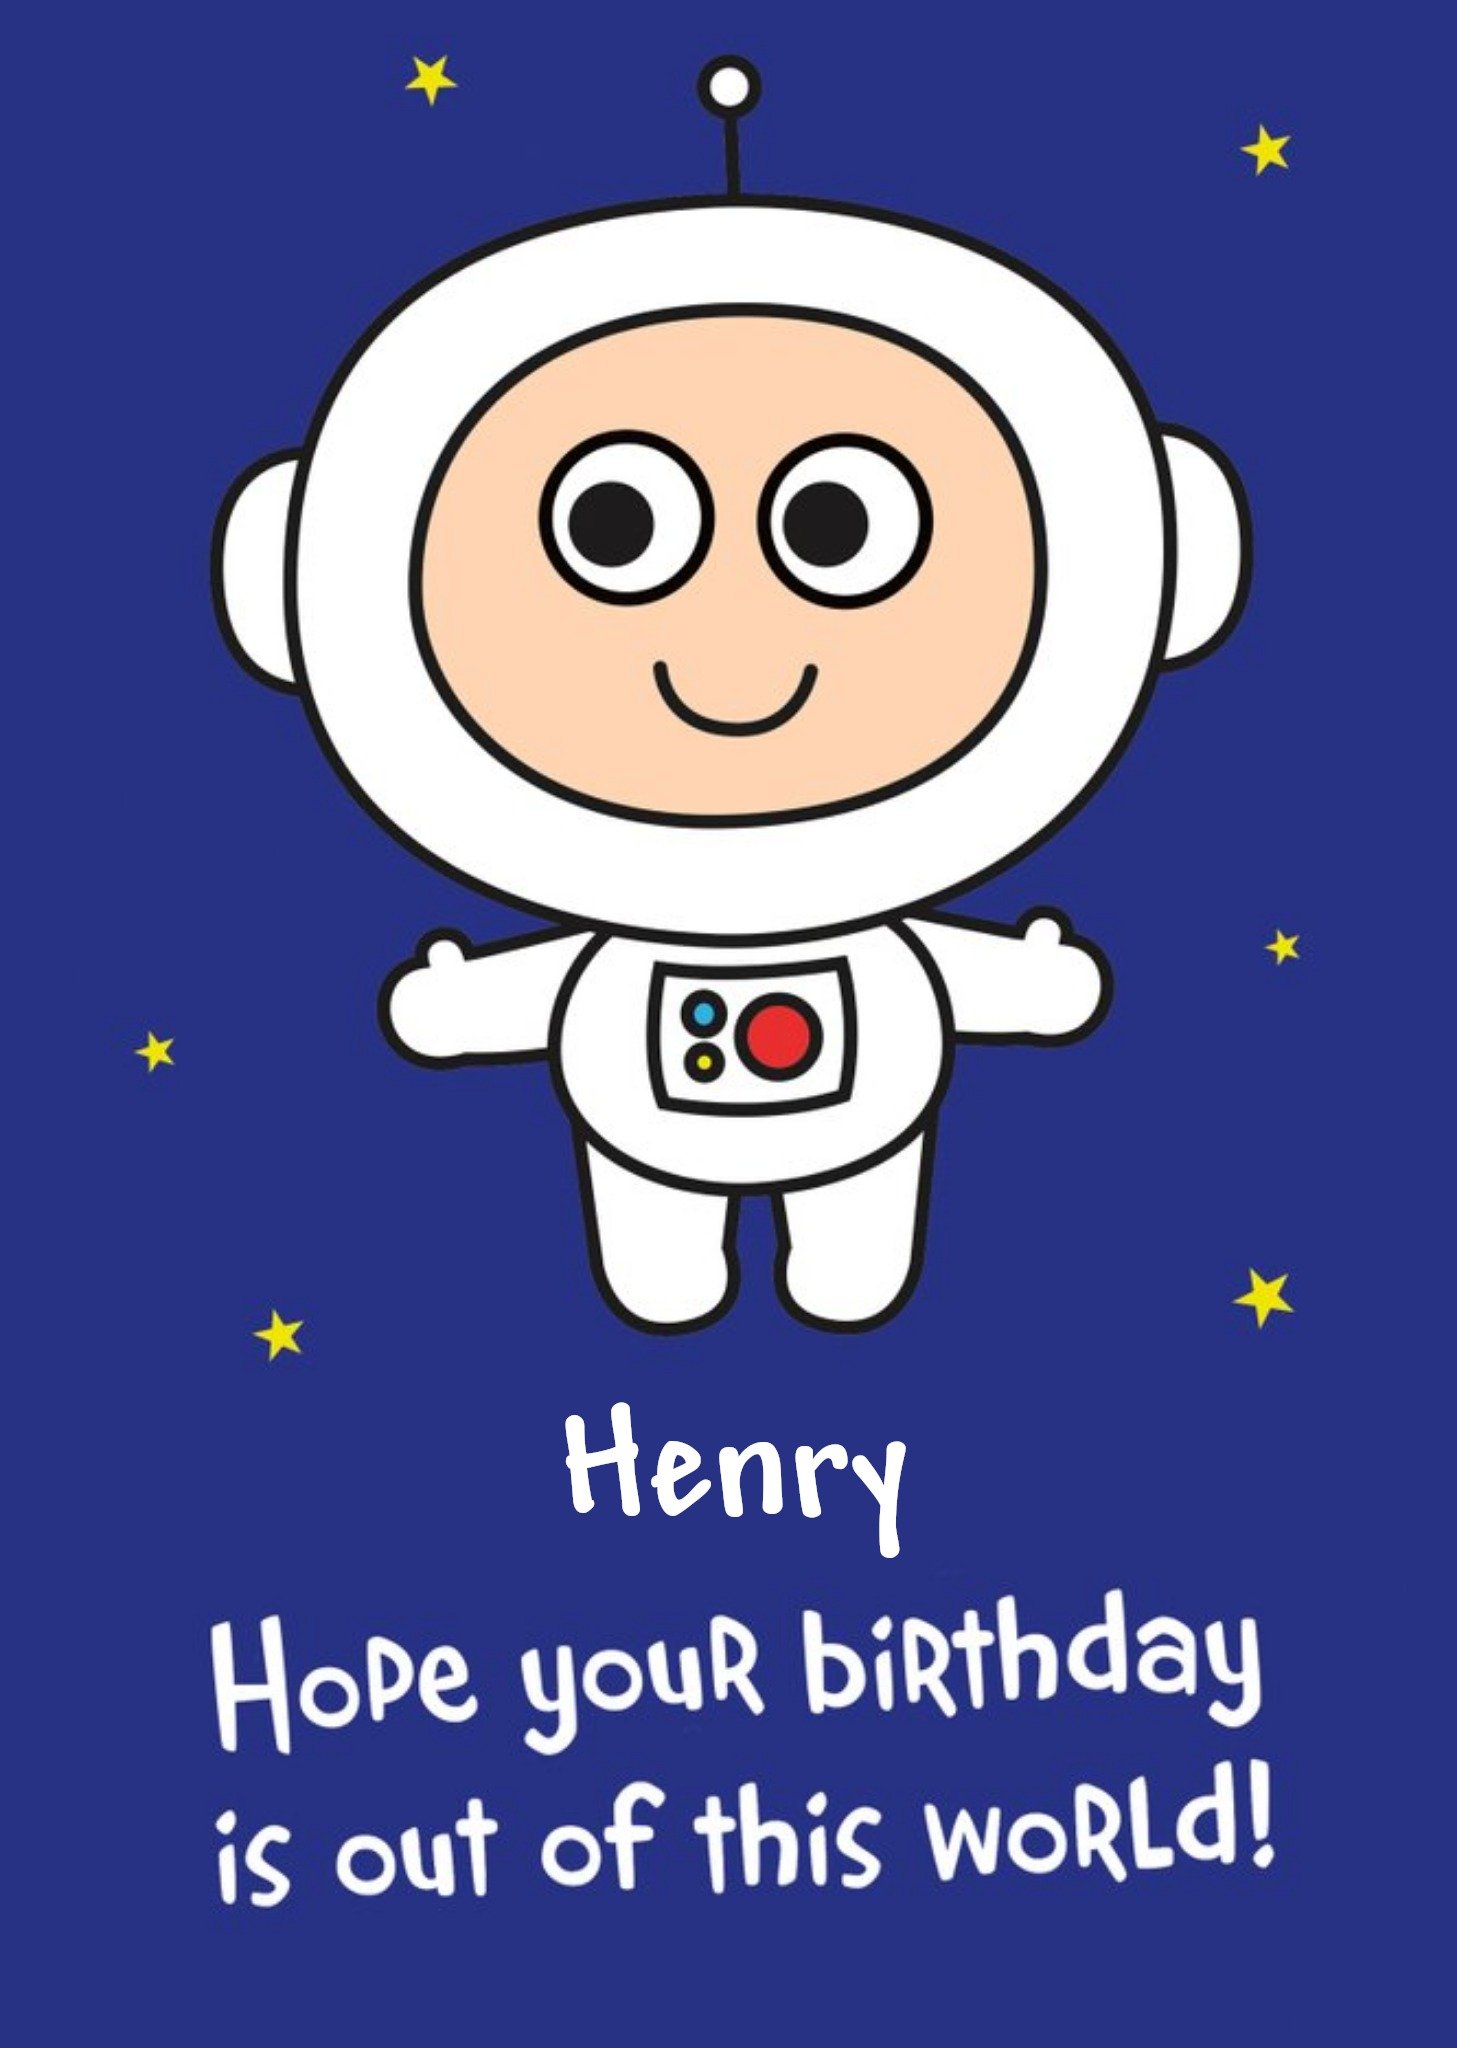 Moonpig Cartoon Illustration Of A Spaceman Floating Among The Stars Birthday Card, Large